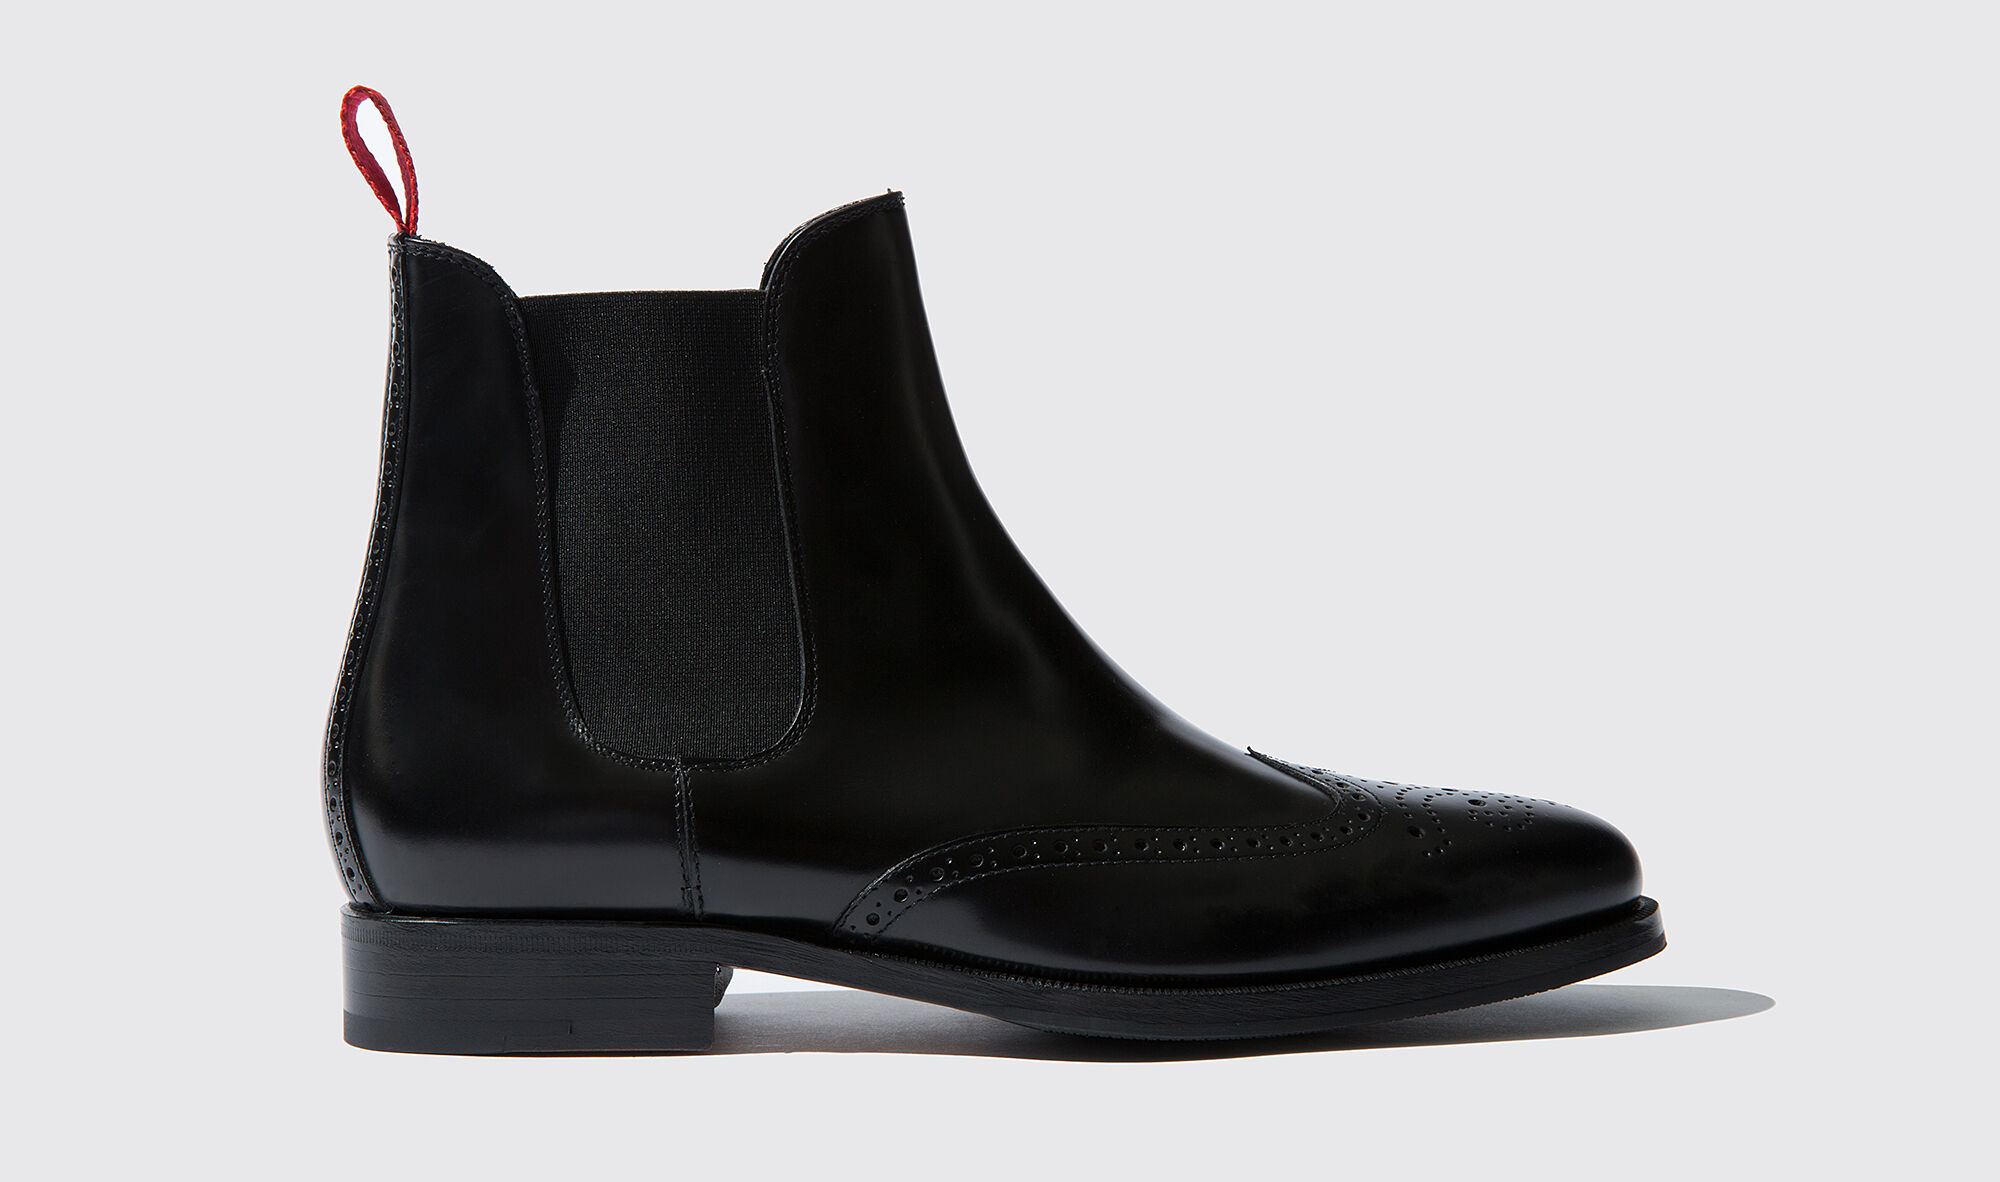 Scarosso ankle boots - Black